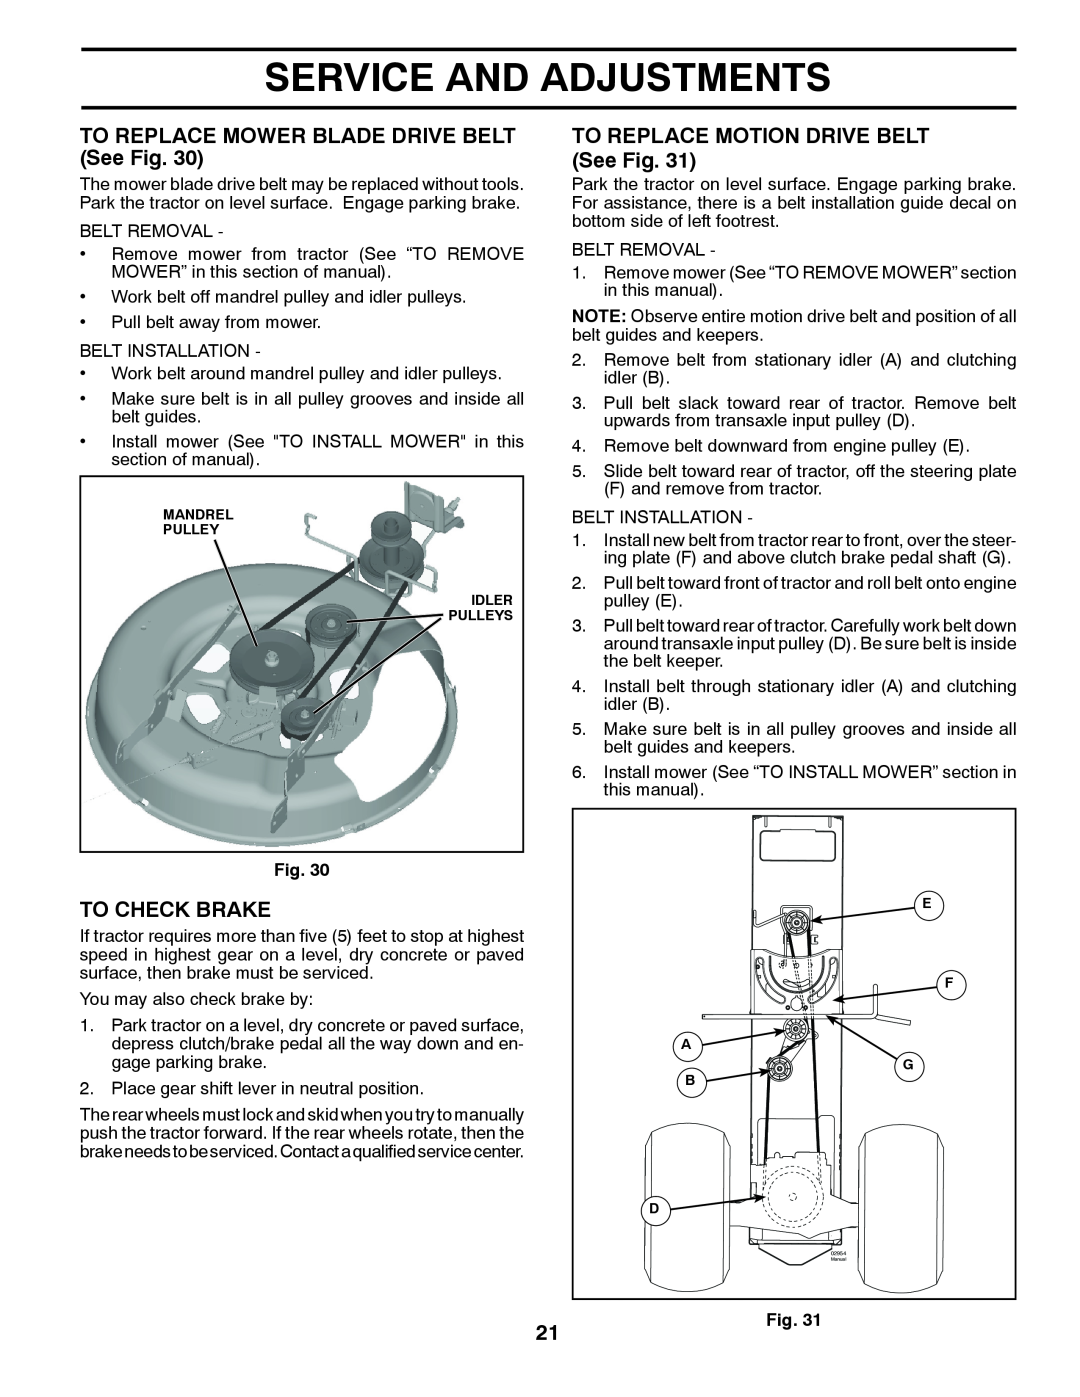 Weed Eater 435057 manual TO REPLACE MOWER BLADE DRIVE BELT See Fig, TO REPLACE MOTION DRIVE BELT See Fig, To Check Brake 